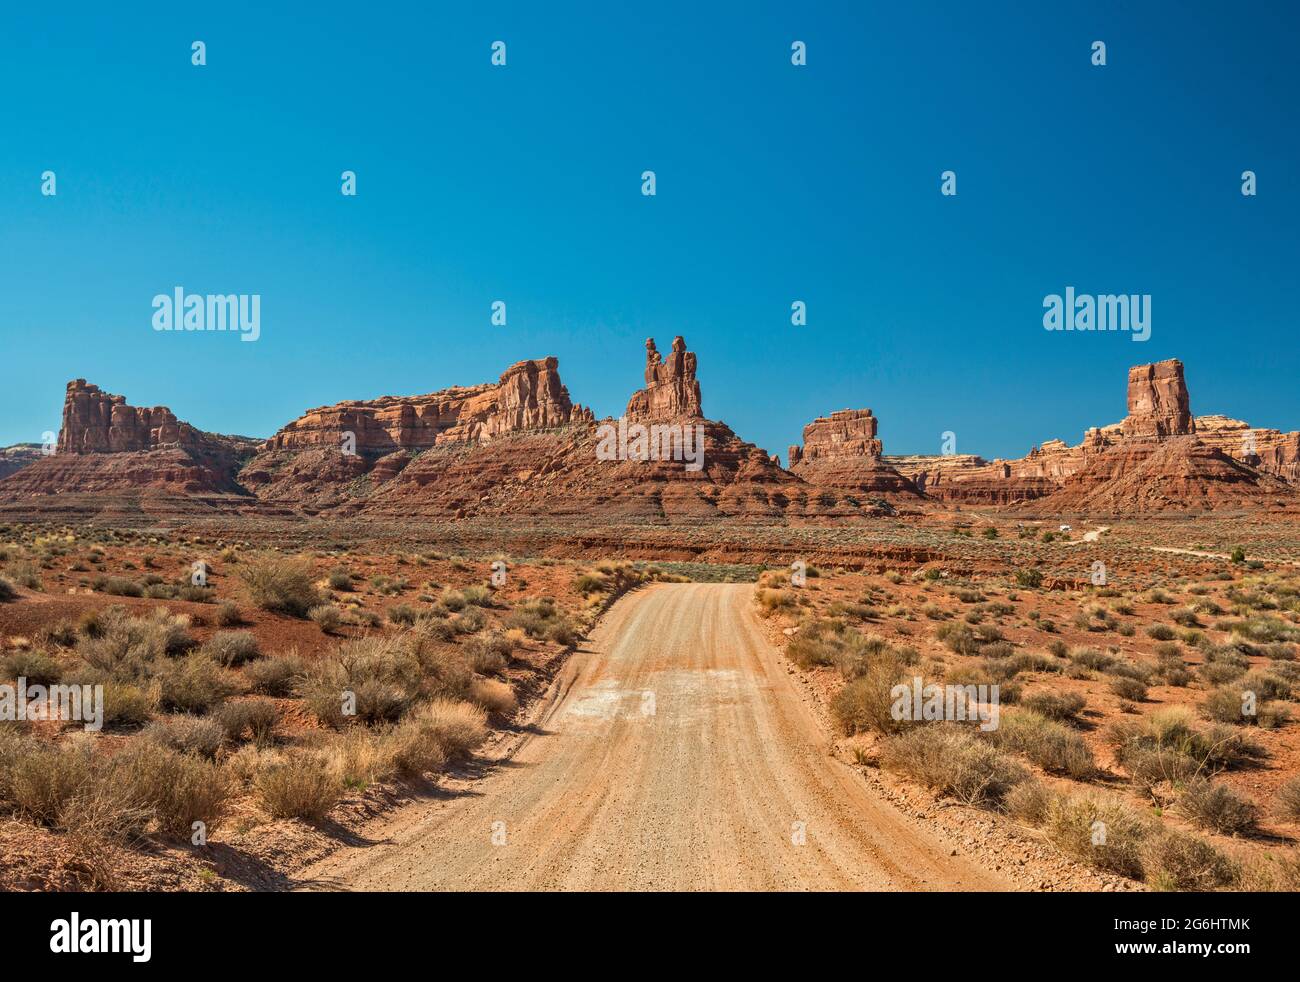 Sandstone towers in Valley of the Gods, Bears Ears National Monument (2016-2017), Utah, USA Stock Photo